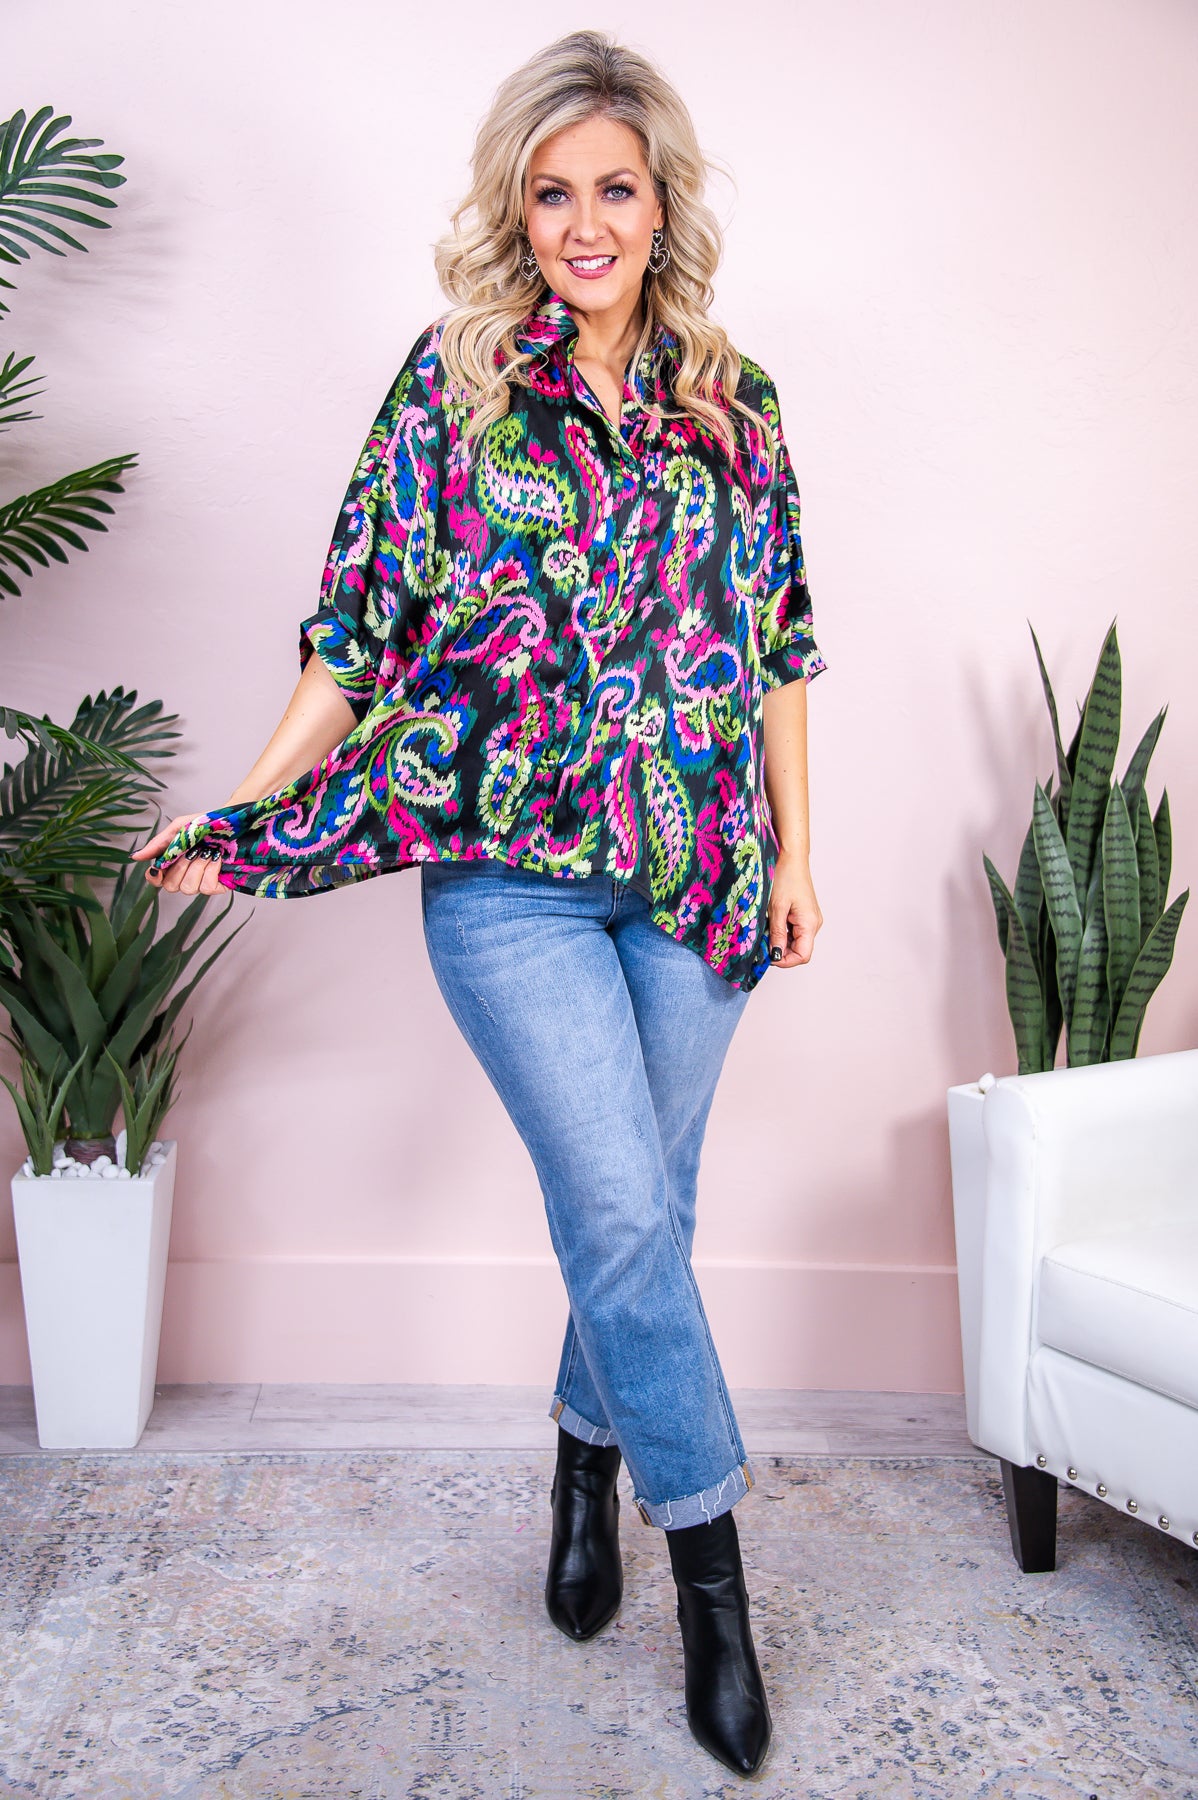 Boost Your Confidence Black/Green/Pink Paisley Top - T8673BK